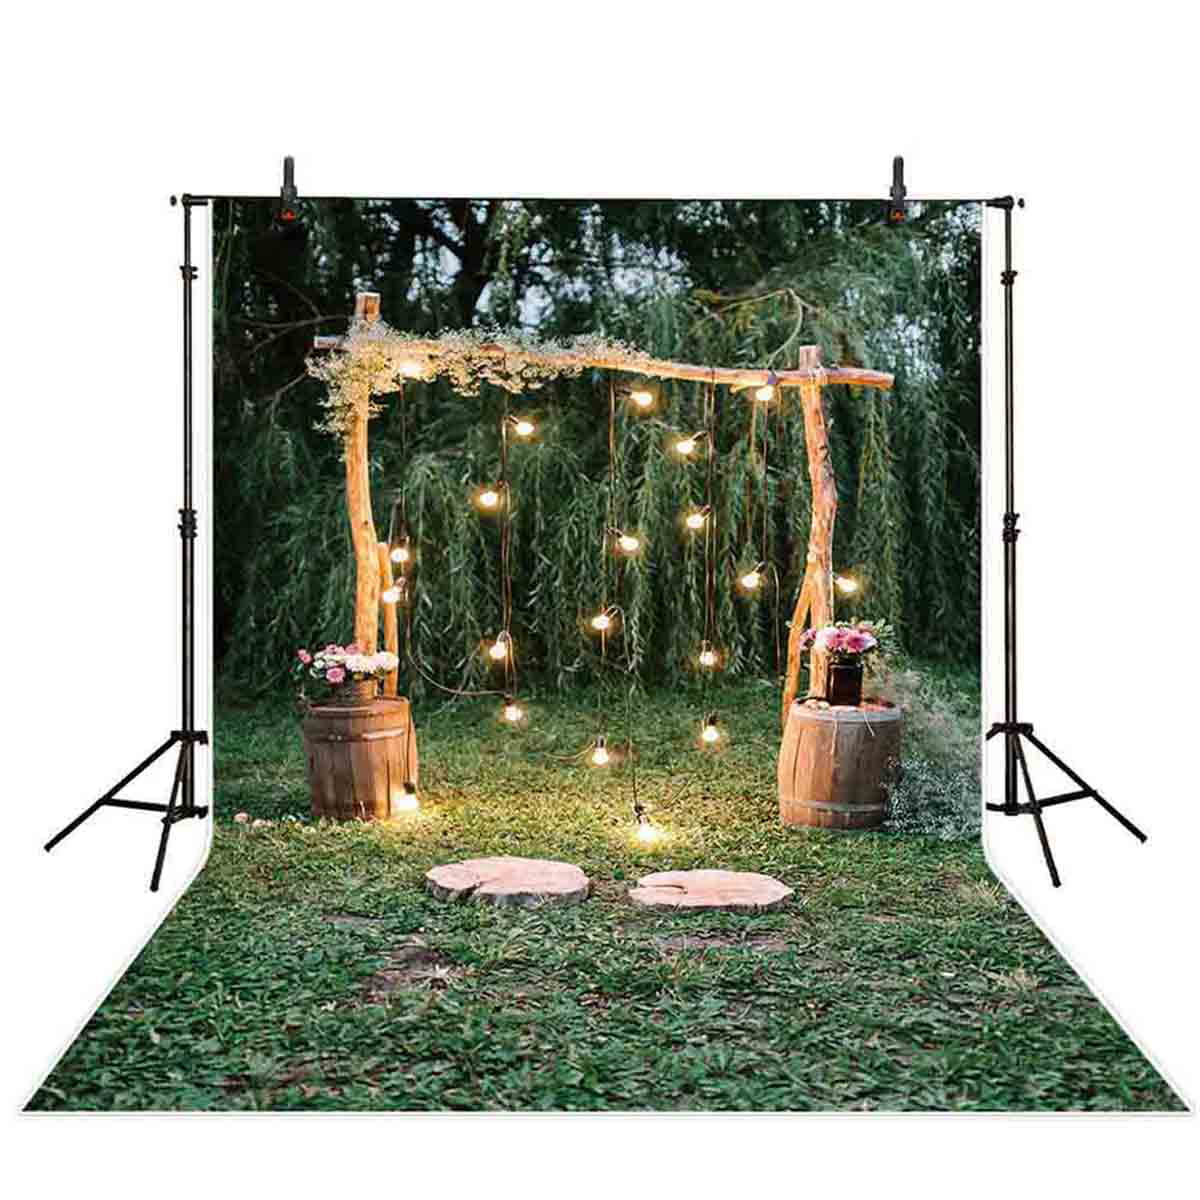 SJOLOON Valentines Day Backdrop for Photography Rustic Wood Wedding Backdrop Red Heart Stage Lighting Bridal Baby Shower Decoration Banner 11811 8x6FT